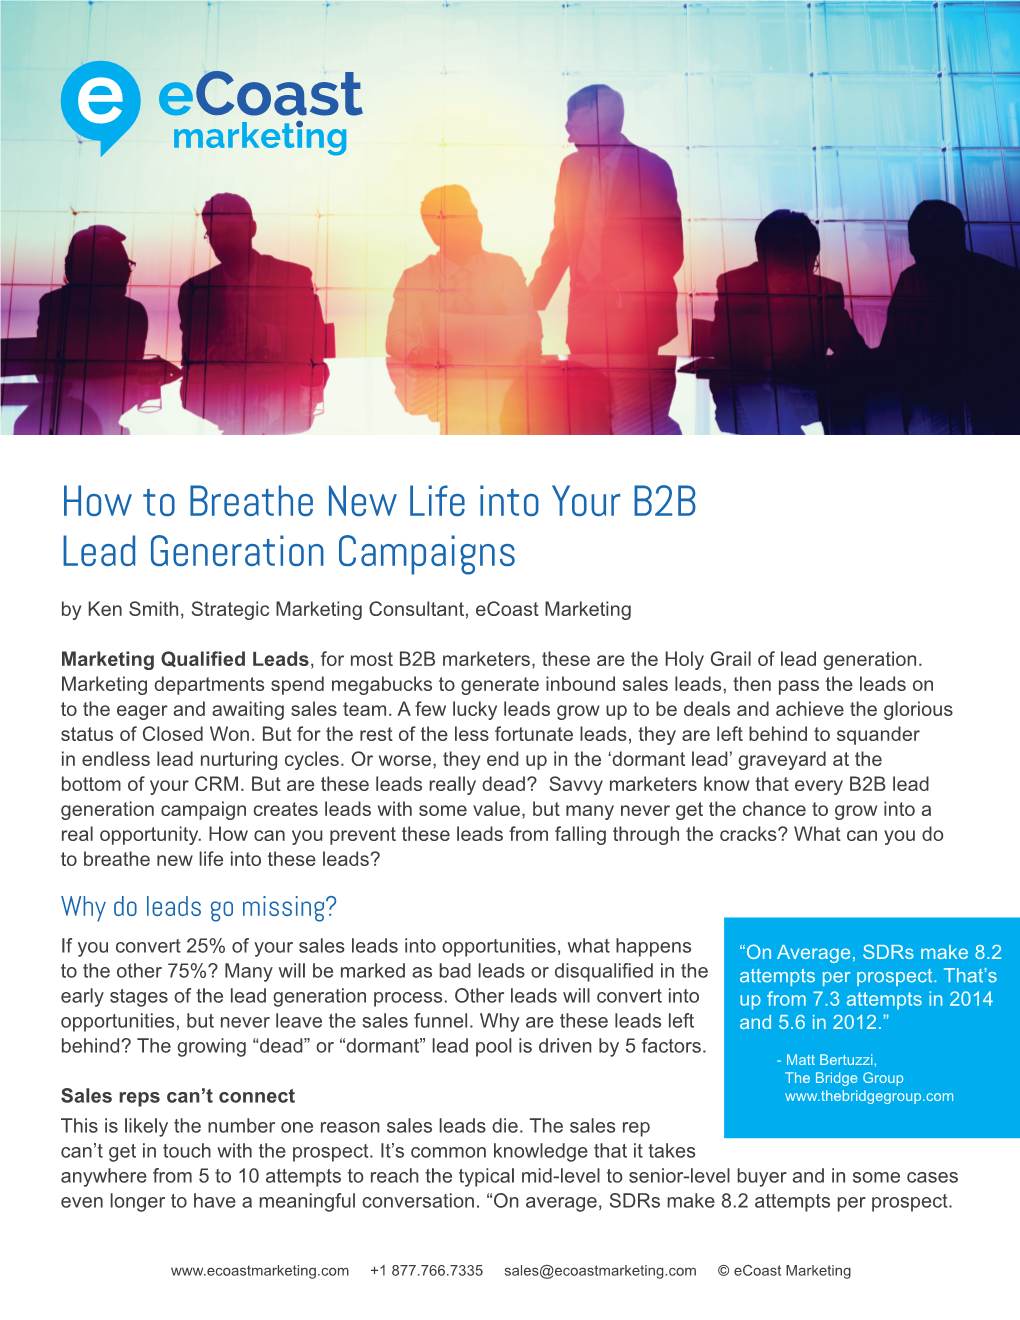 How to Breathe New Life Into Your B2B Lead Generation Campaigns by Ken Smith, Strategic Marketing Consultant, Ecoast Marketing